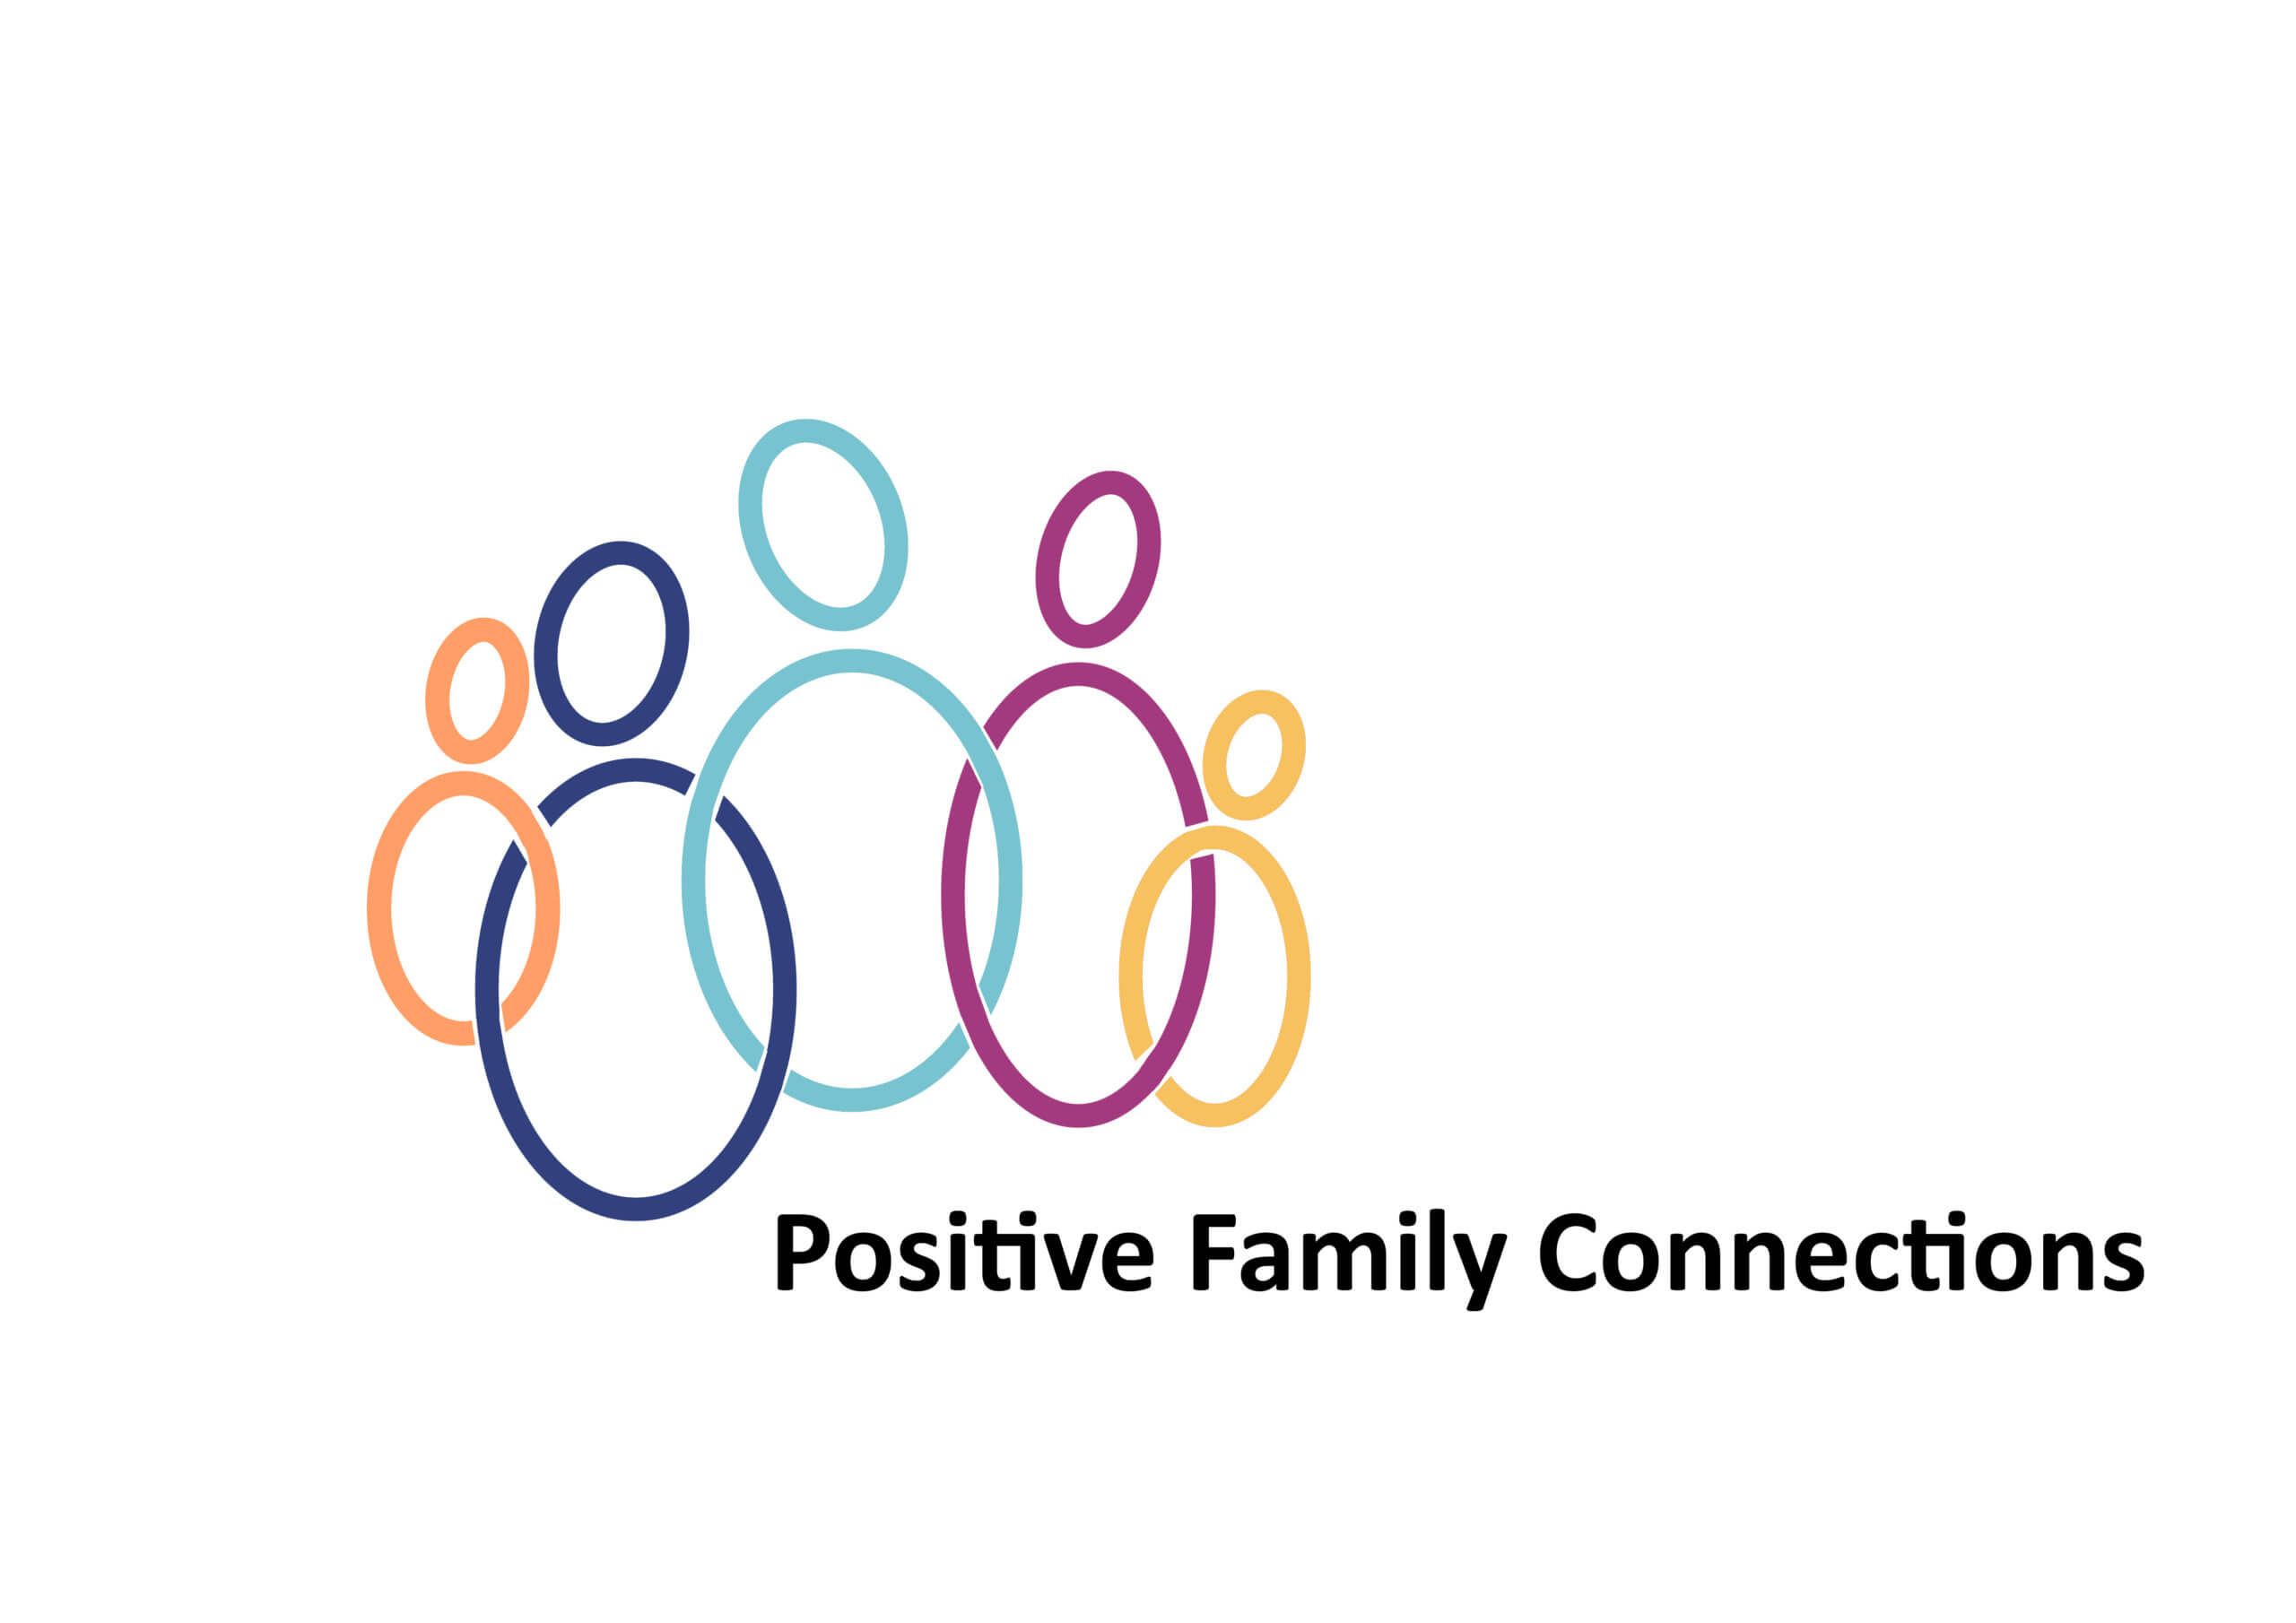 Positive Family Connections logo